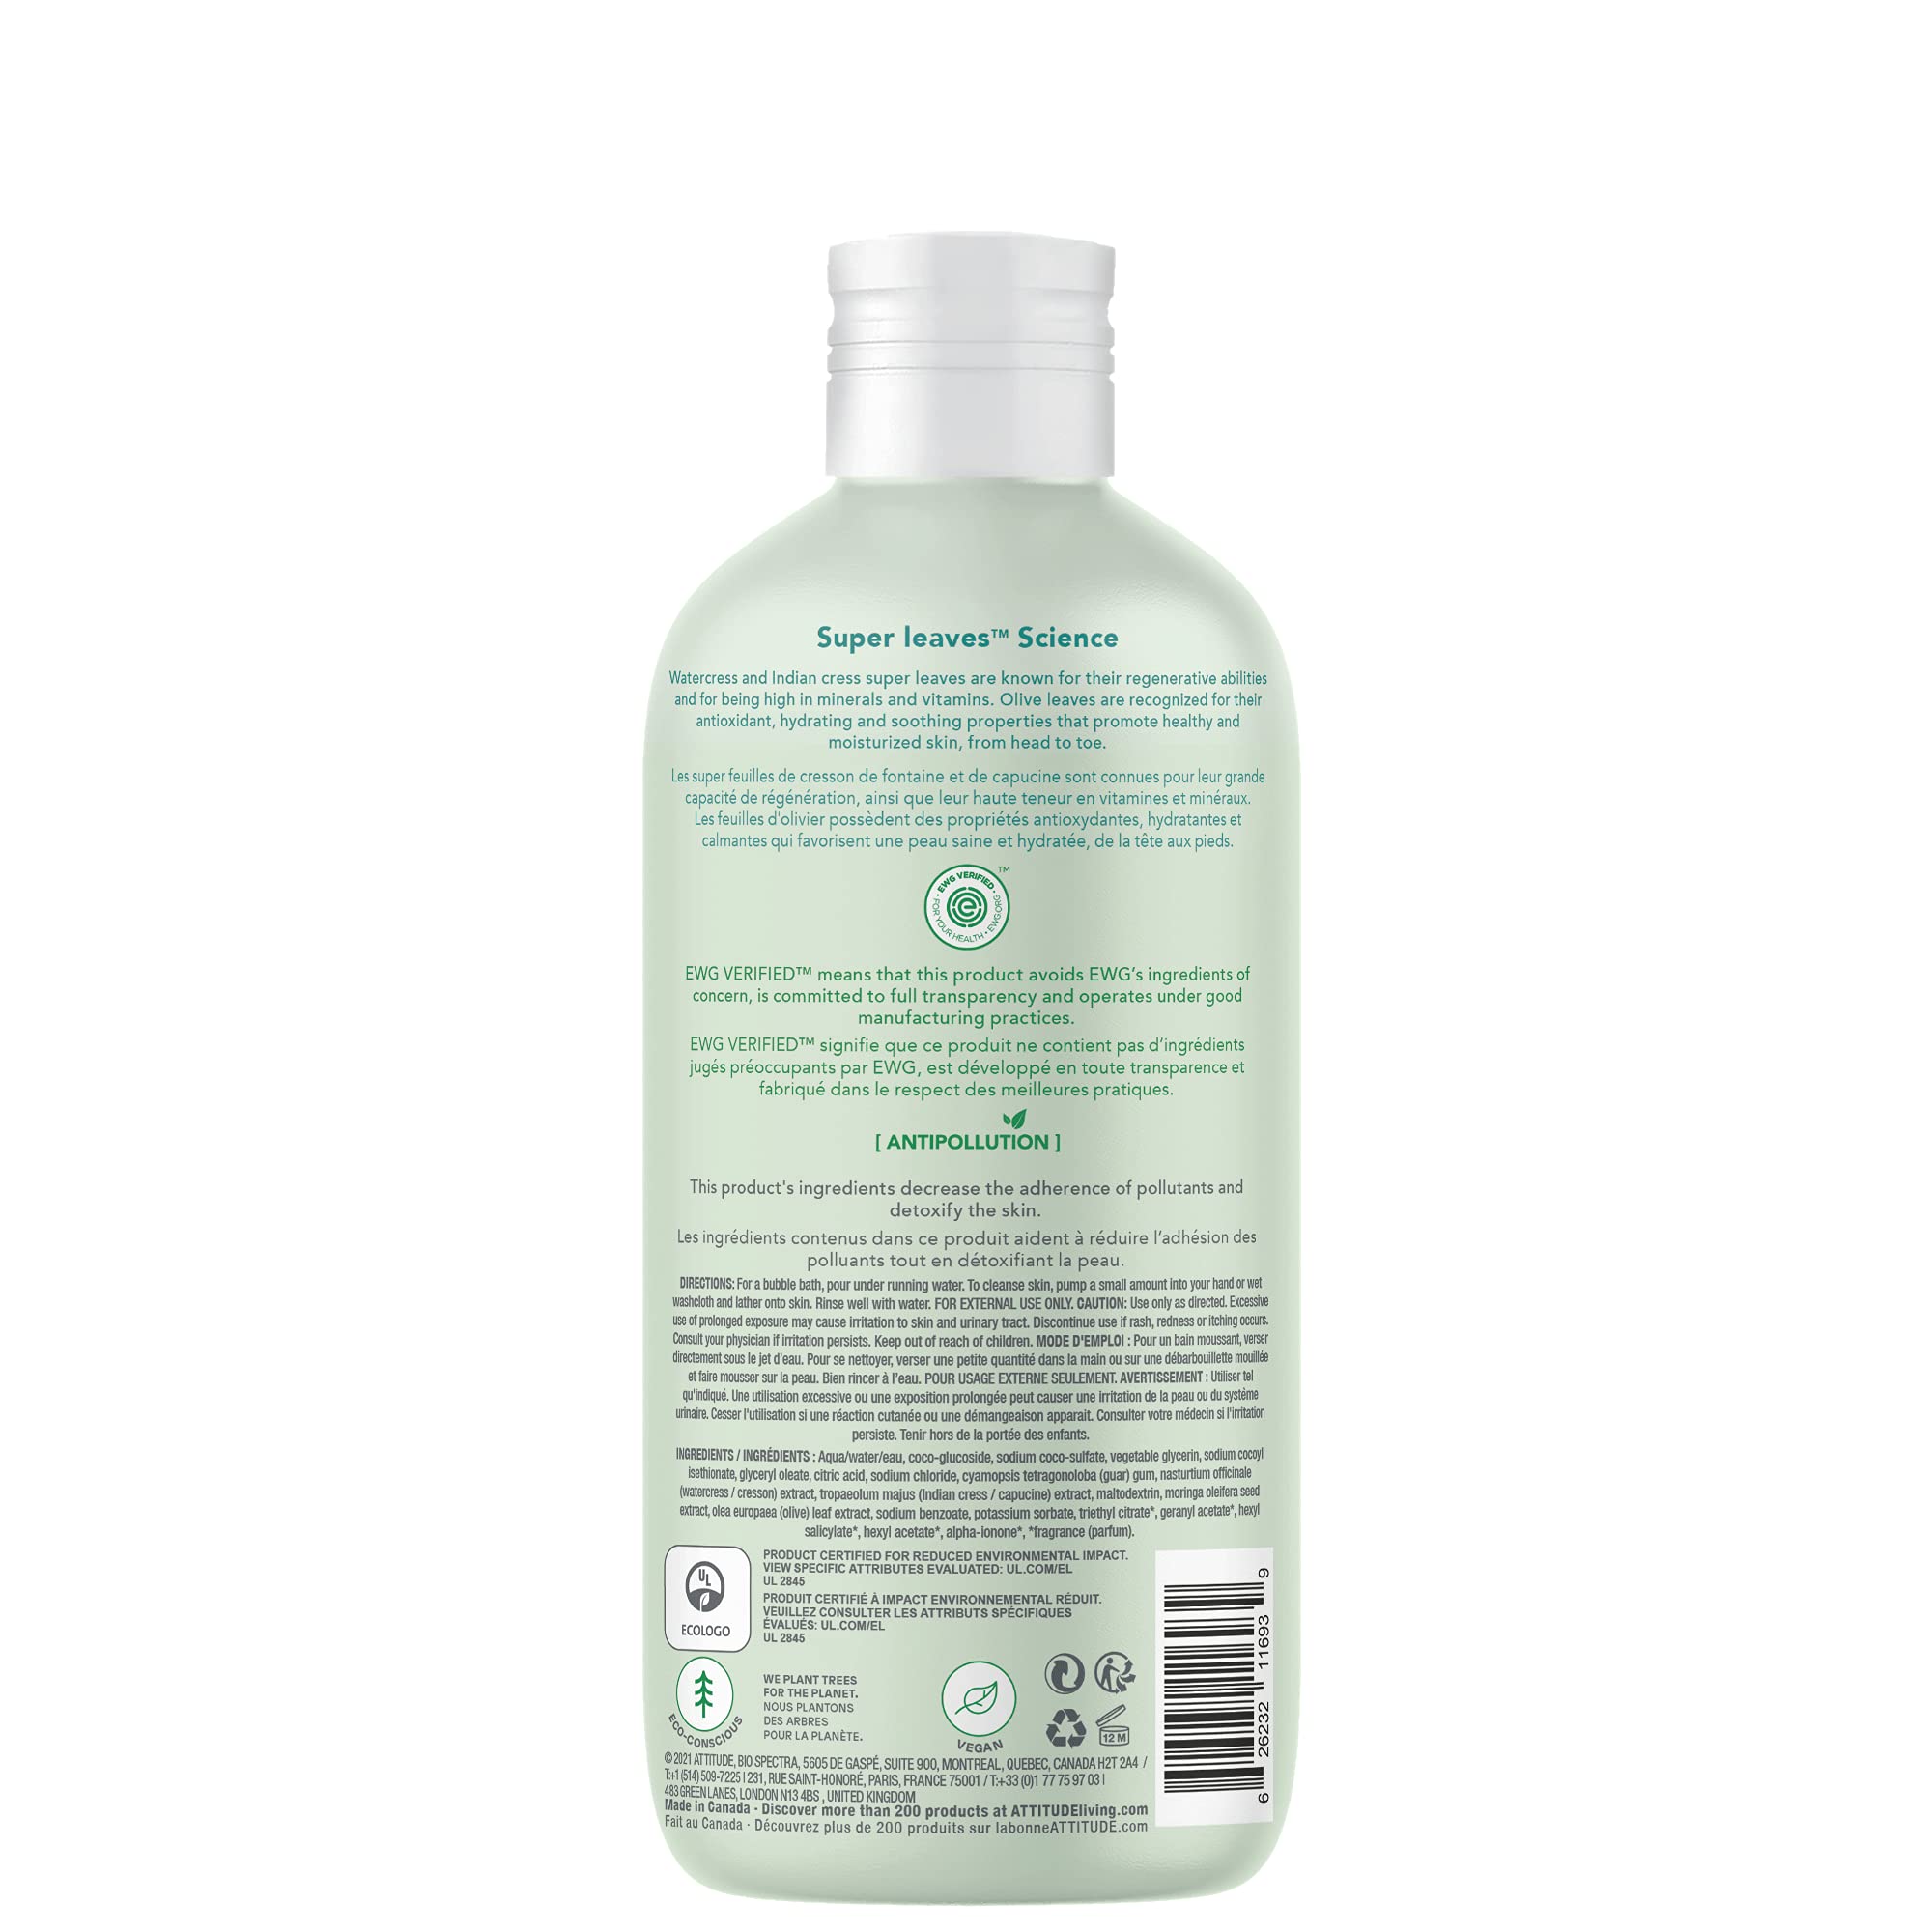 ATTITUDE Bubble Bath, EWG Verified, Plant and Mineral-Based Ingredients, Dermatologically Tested, Vegan and Cruelty-Free Body Care Products, Olive Leaves, 16 Fl Oz